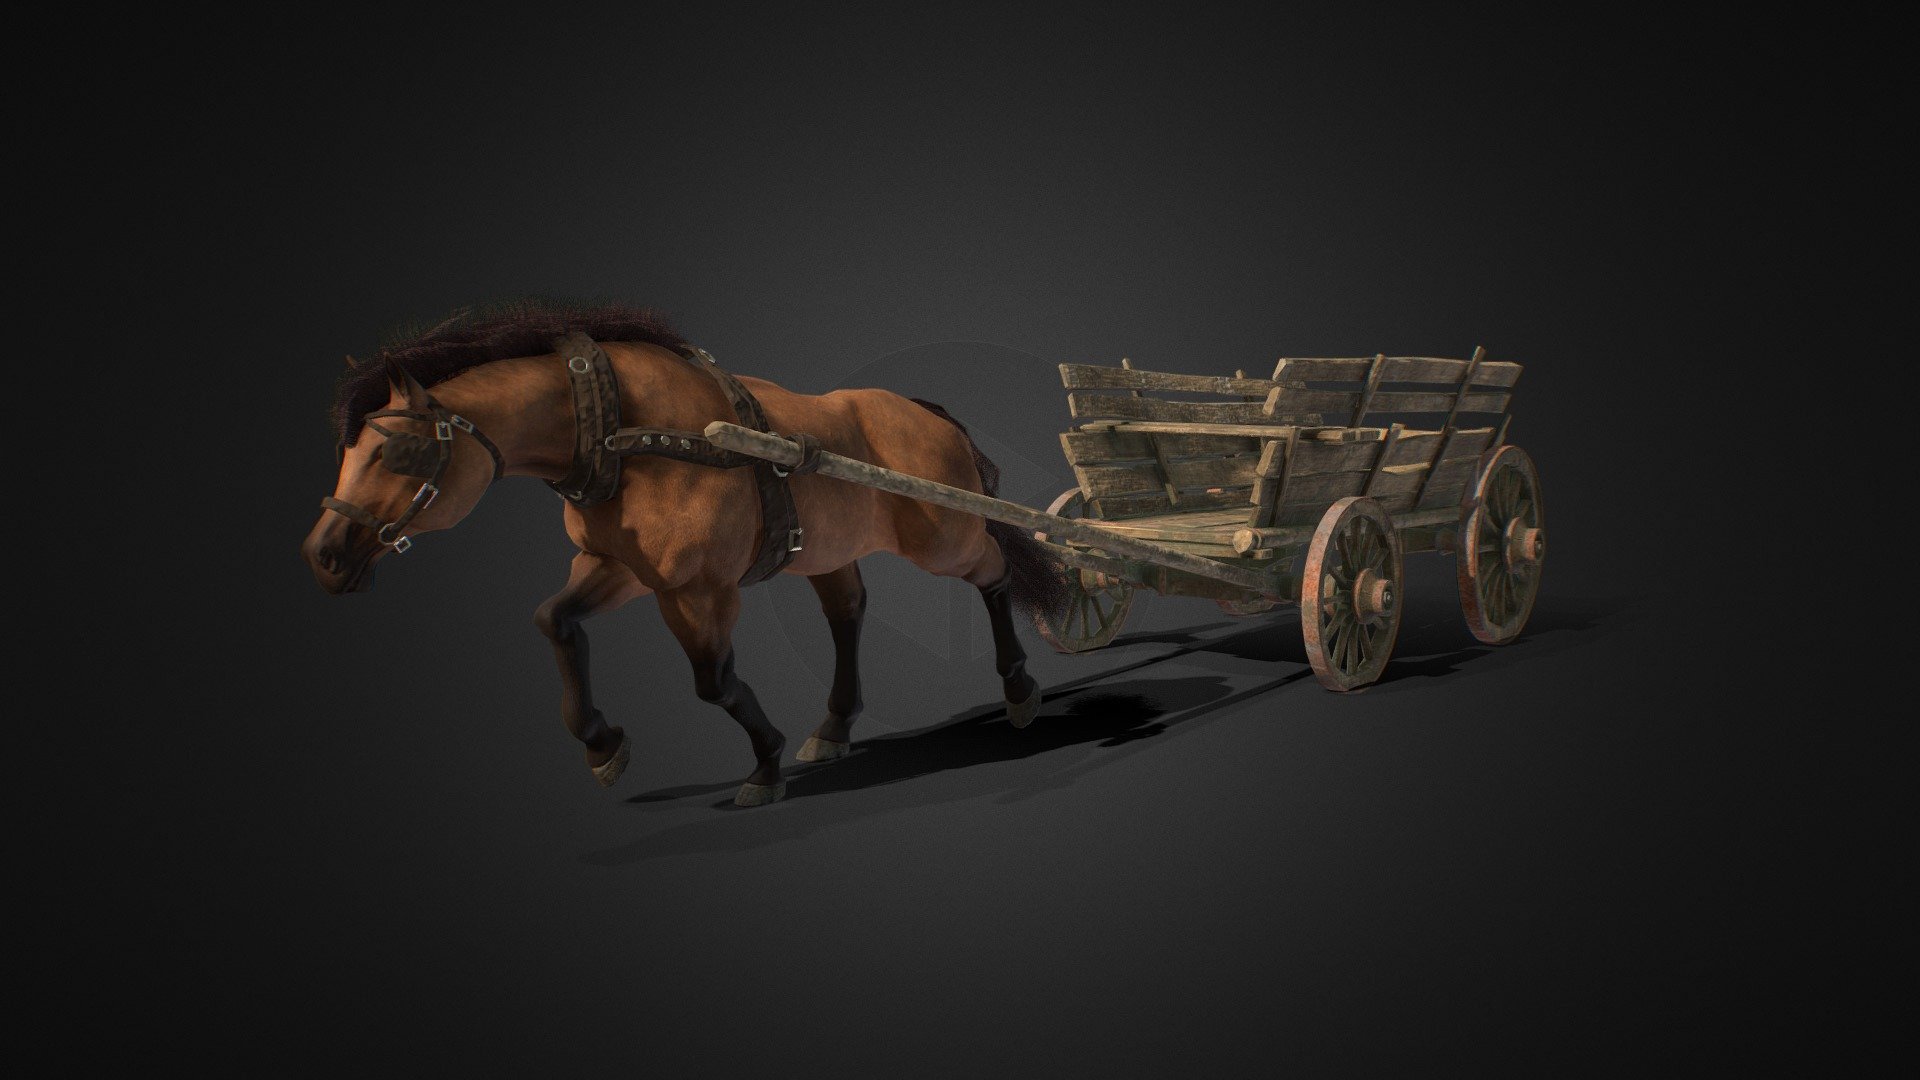 A rigged Horse that is harnessed to a cart.
Blend* file have set for simple animation of collision dray with ground.

Verts: 31161
Faces: 28467

Animations: 
Horse - Gallop, Walk, Stay
Dray - Turn (left, right), Wheels rotation

Objects: Dray, Horse, Harness
Rigs: Horse, Dray - Dray with Horse - 3D model by evilvoland 3d model